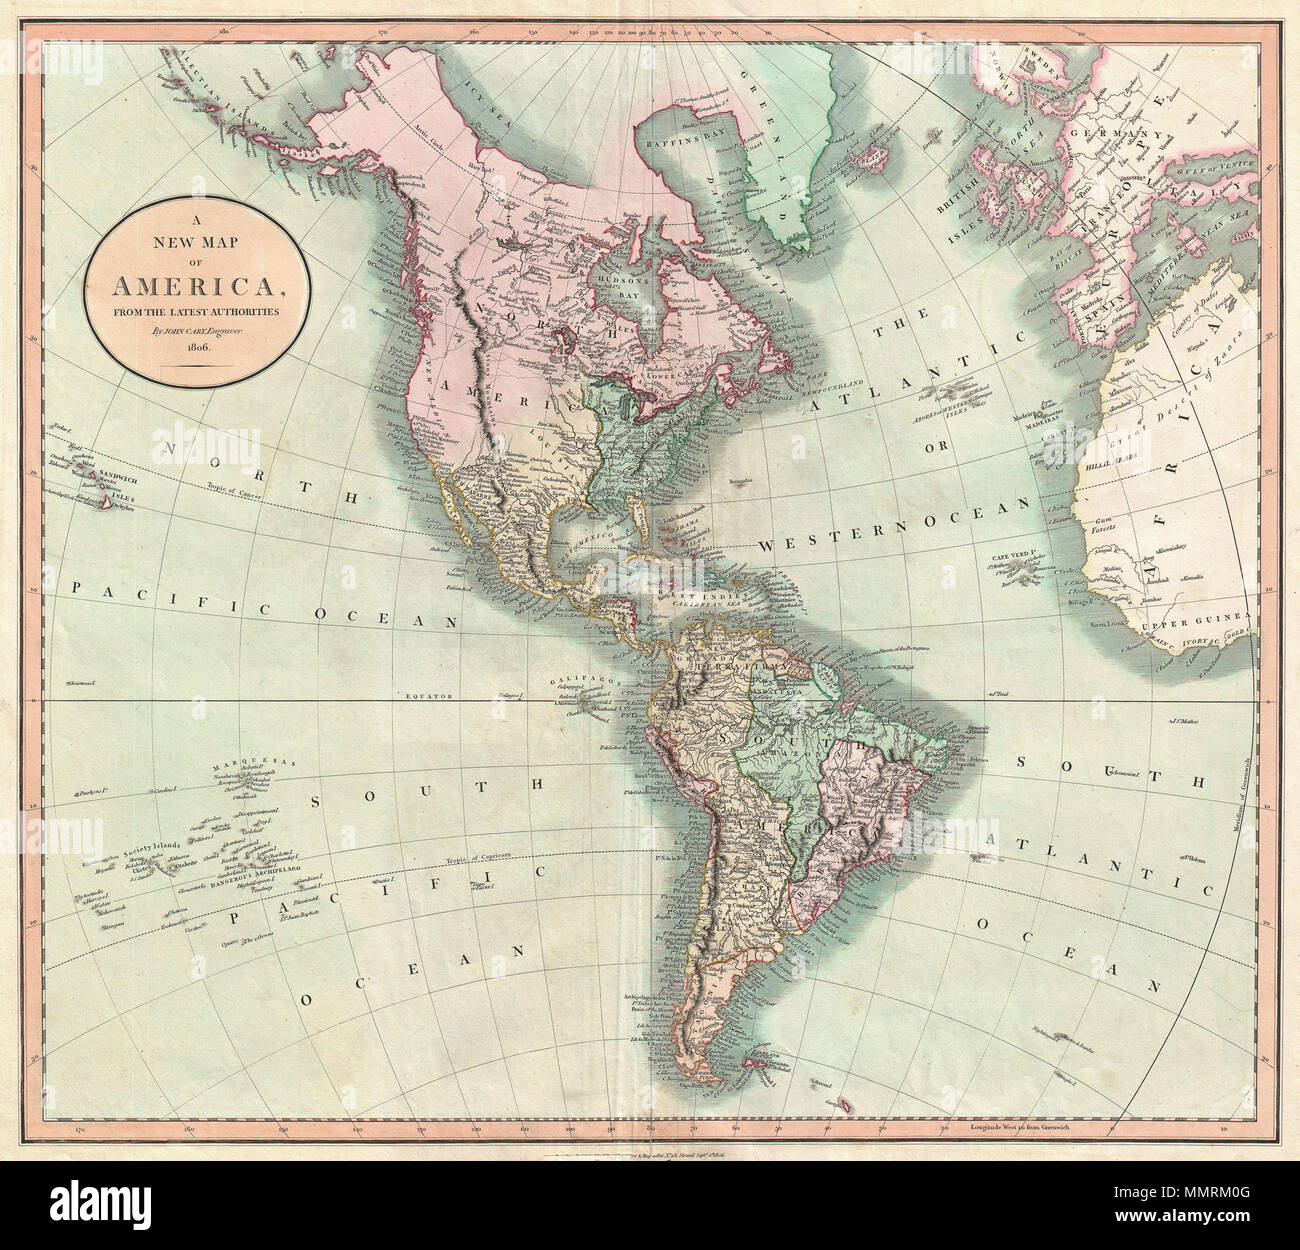 English: An exceptionally beautiful example of John Cary's important 1806  Map of North and South America. Covers the entirety of the Western  Hemisphere with a focus on North and South America.